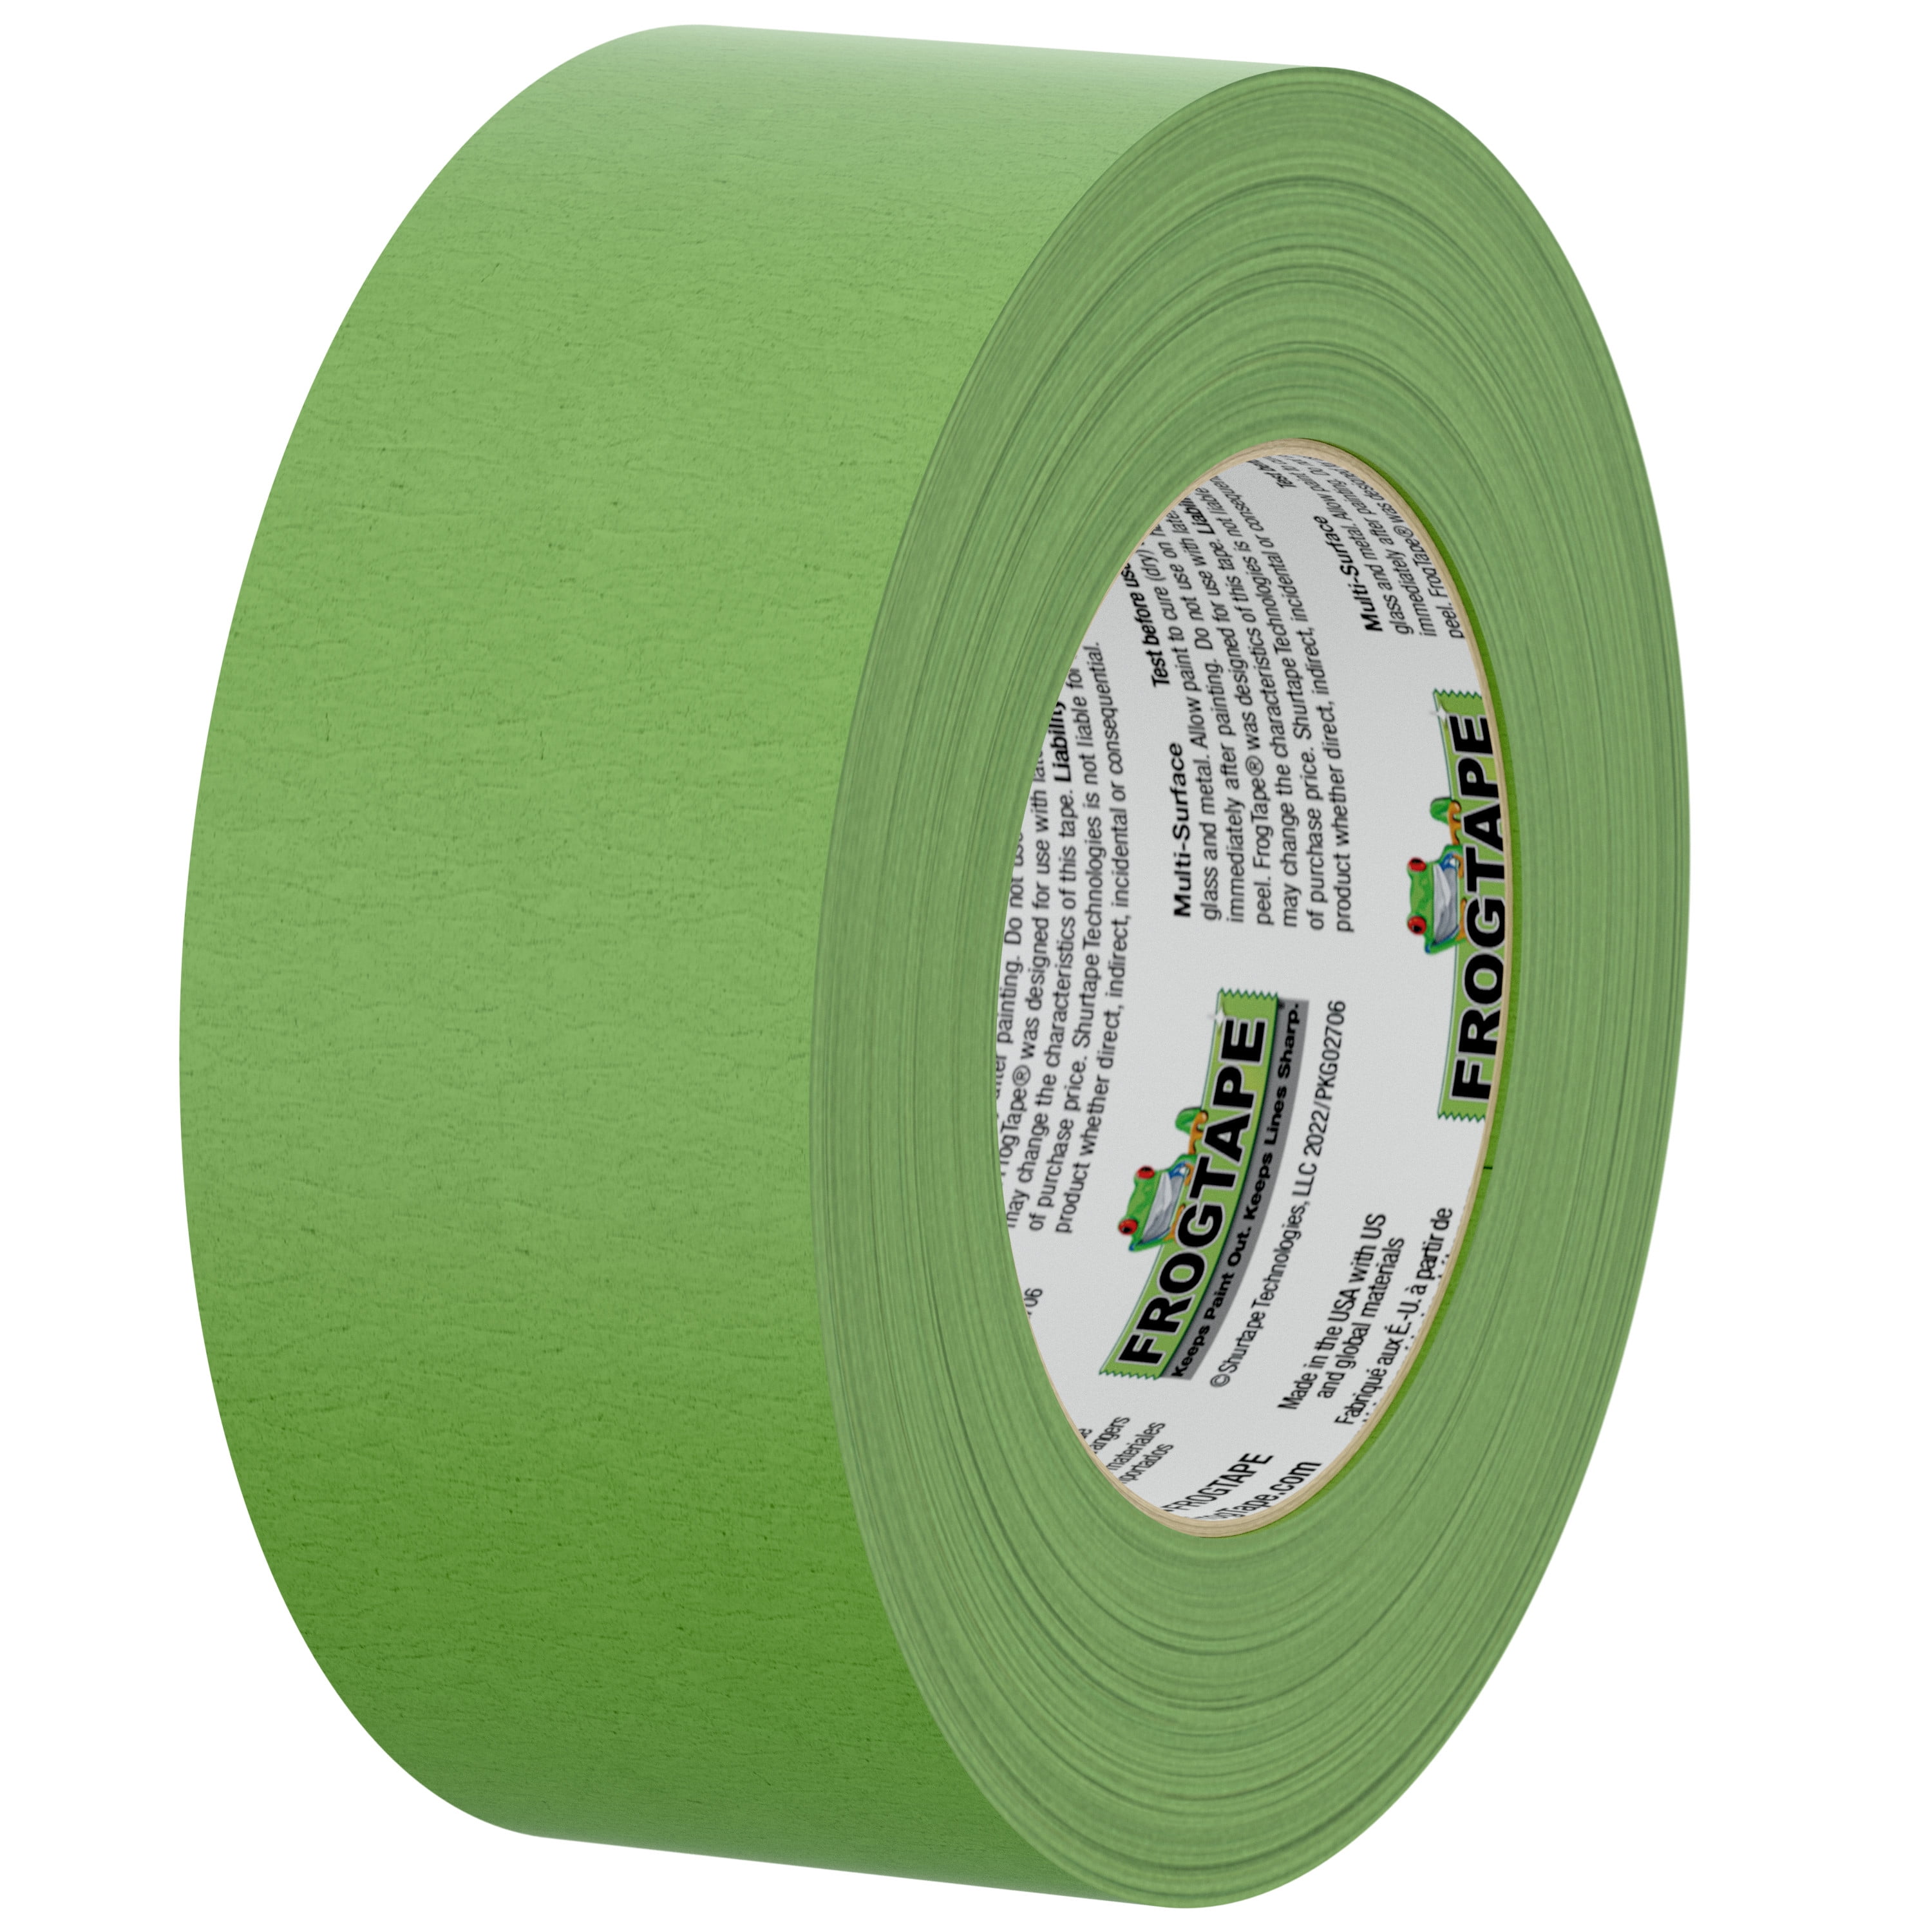 Green Painter's Masking Tape, 2 x 60 yds., 5 Mil Thick for $4.82 Online